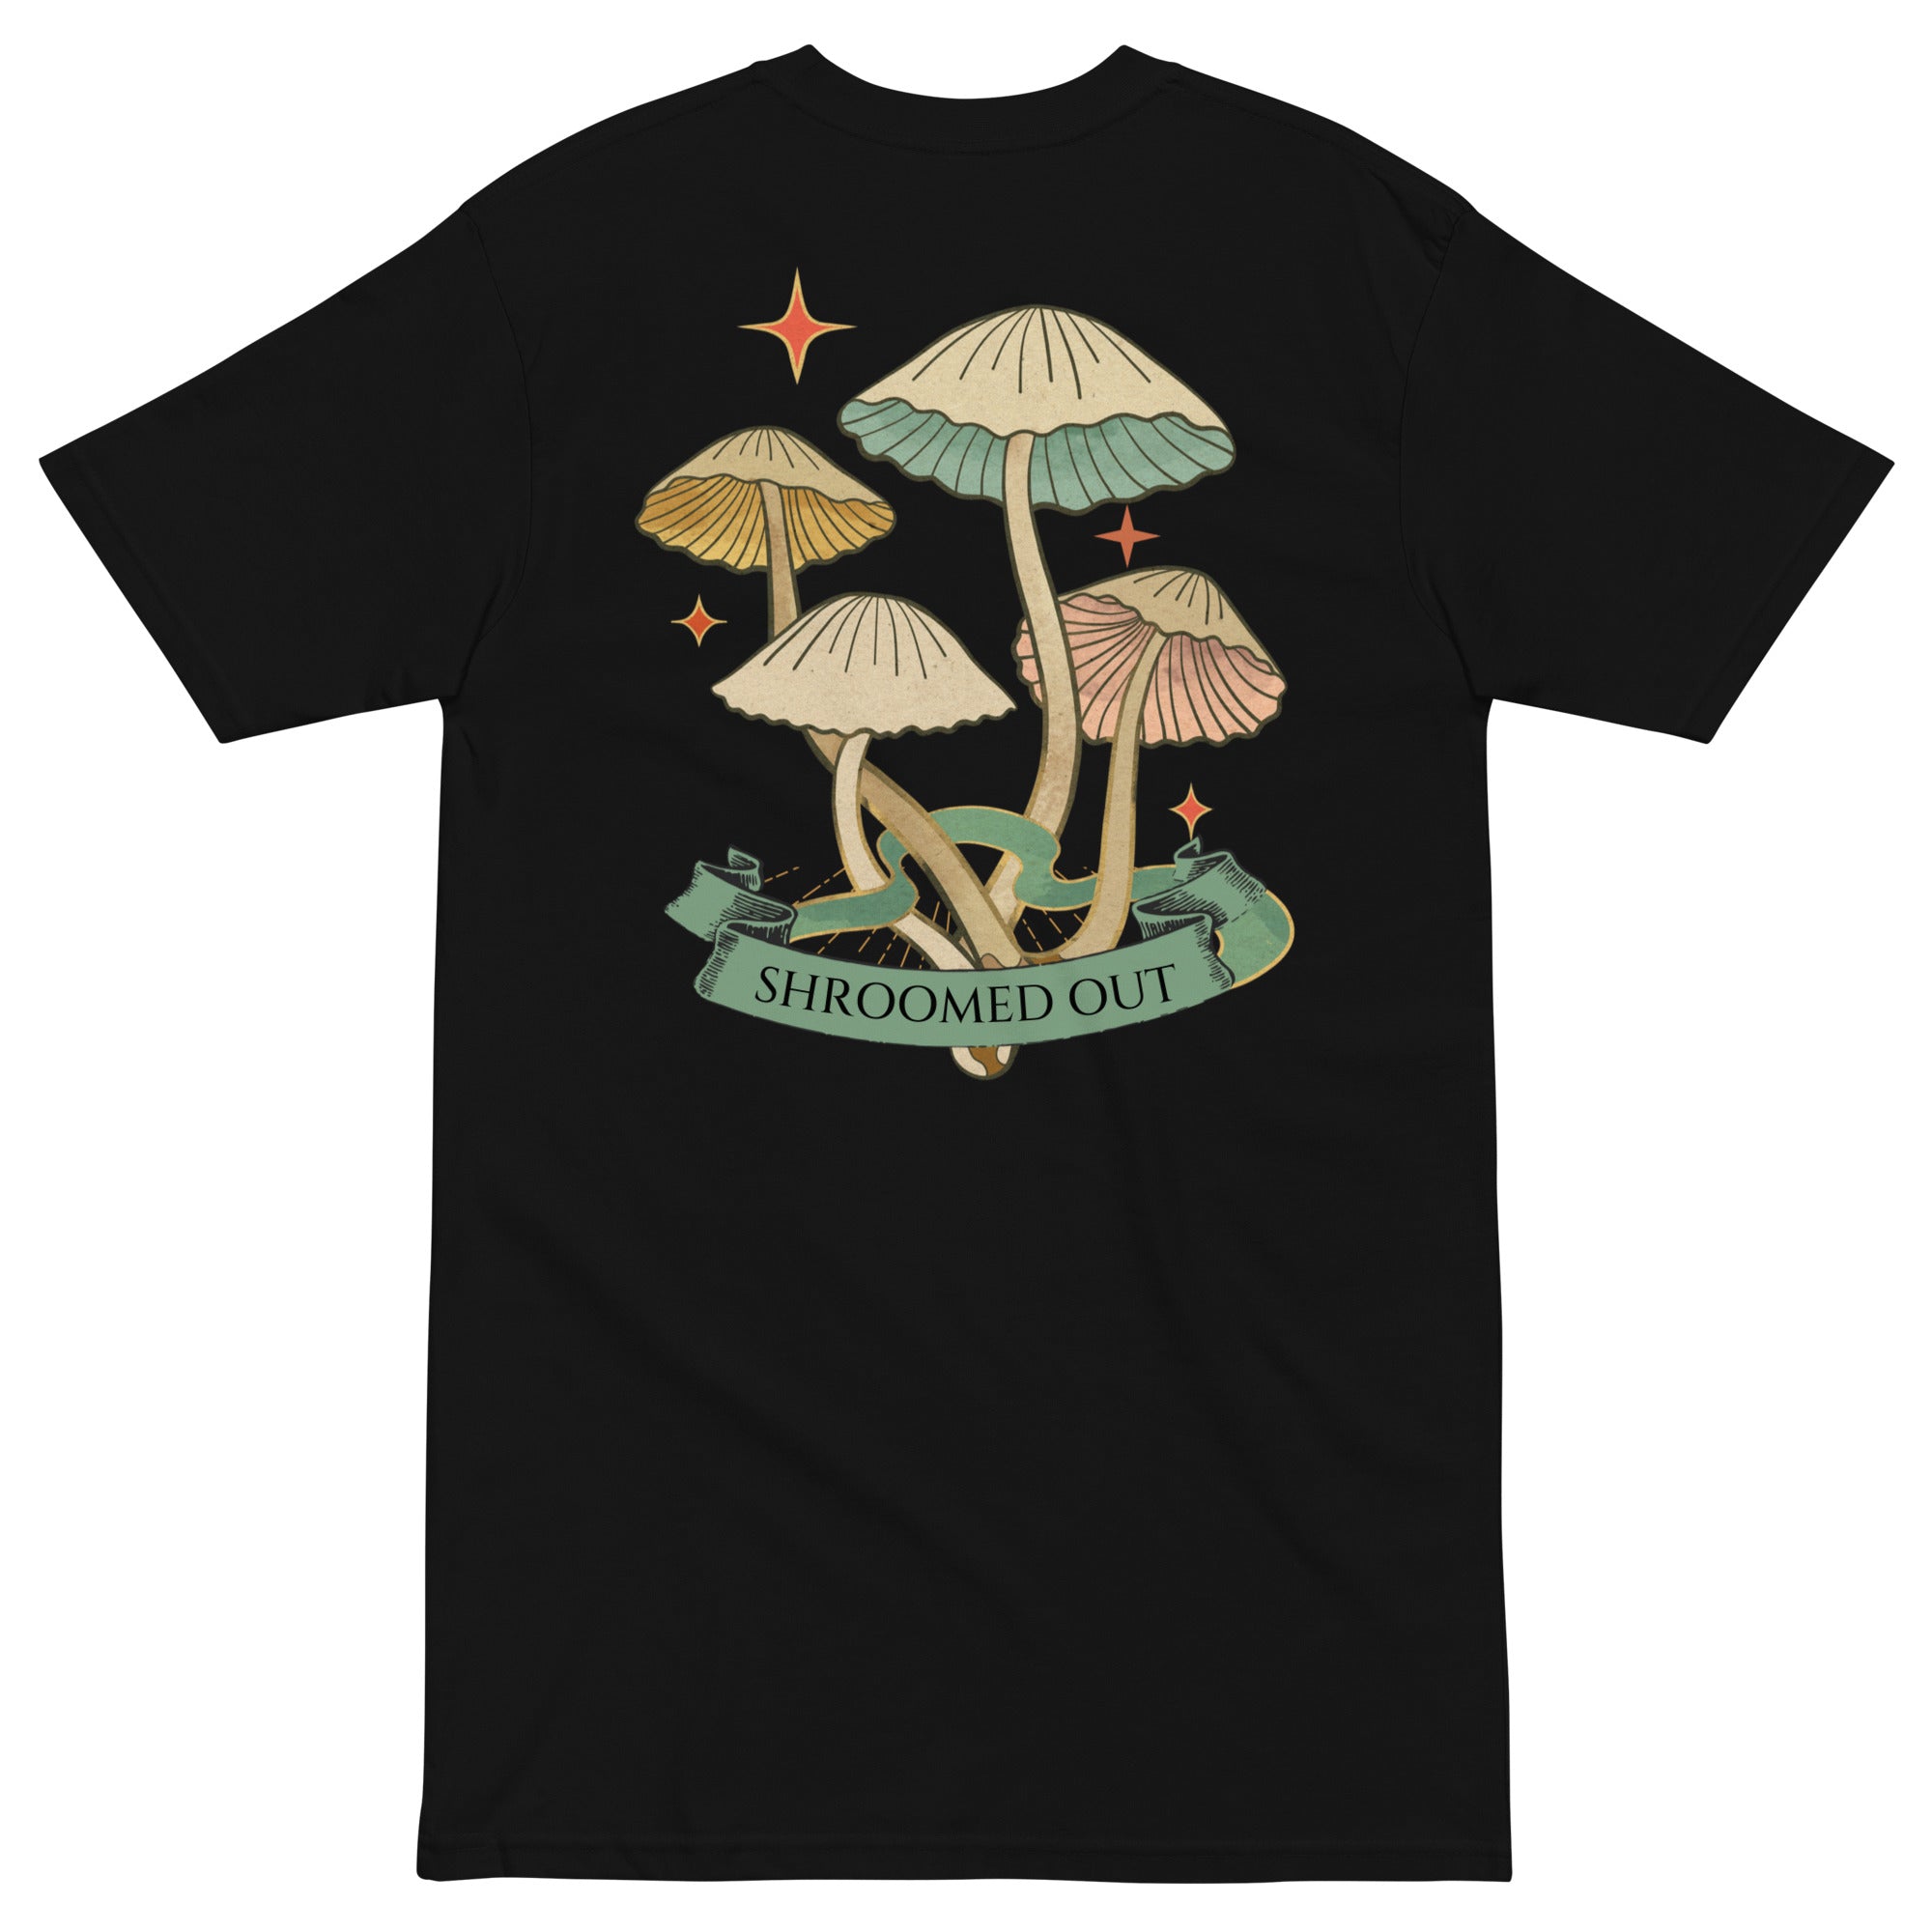 NAMELESS SHROOMED OUT TEE